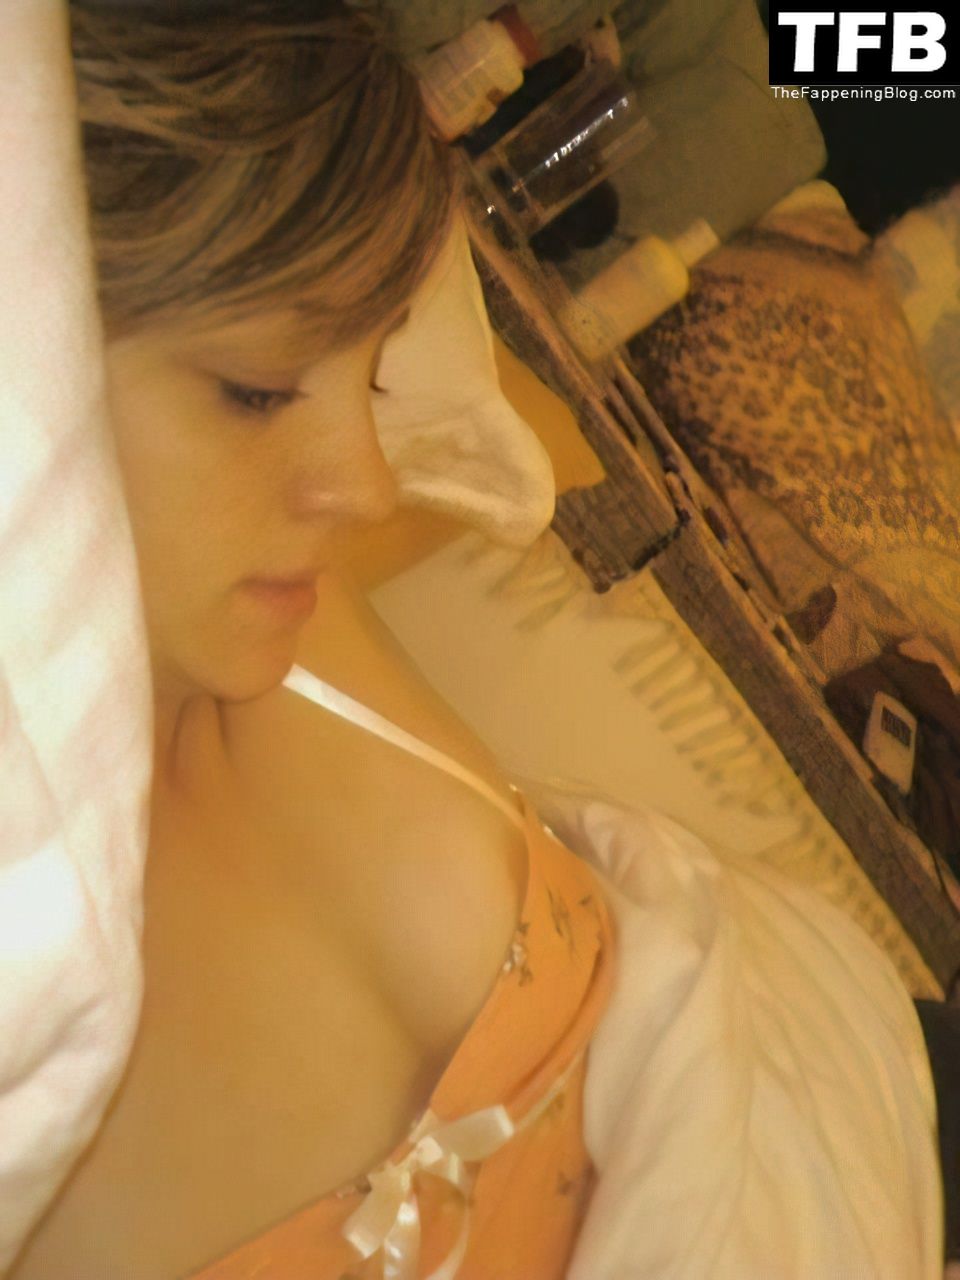 Abby Elliott Nude Sexy Leaked The Fappening Blog 6 - Abby Elliott Nude & Sexy Leaked The Fappening (8 Photos)